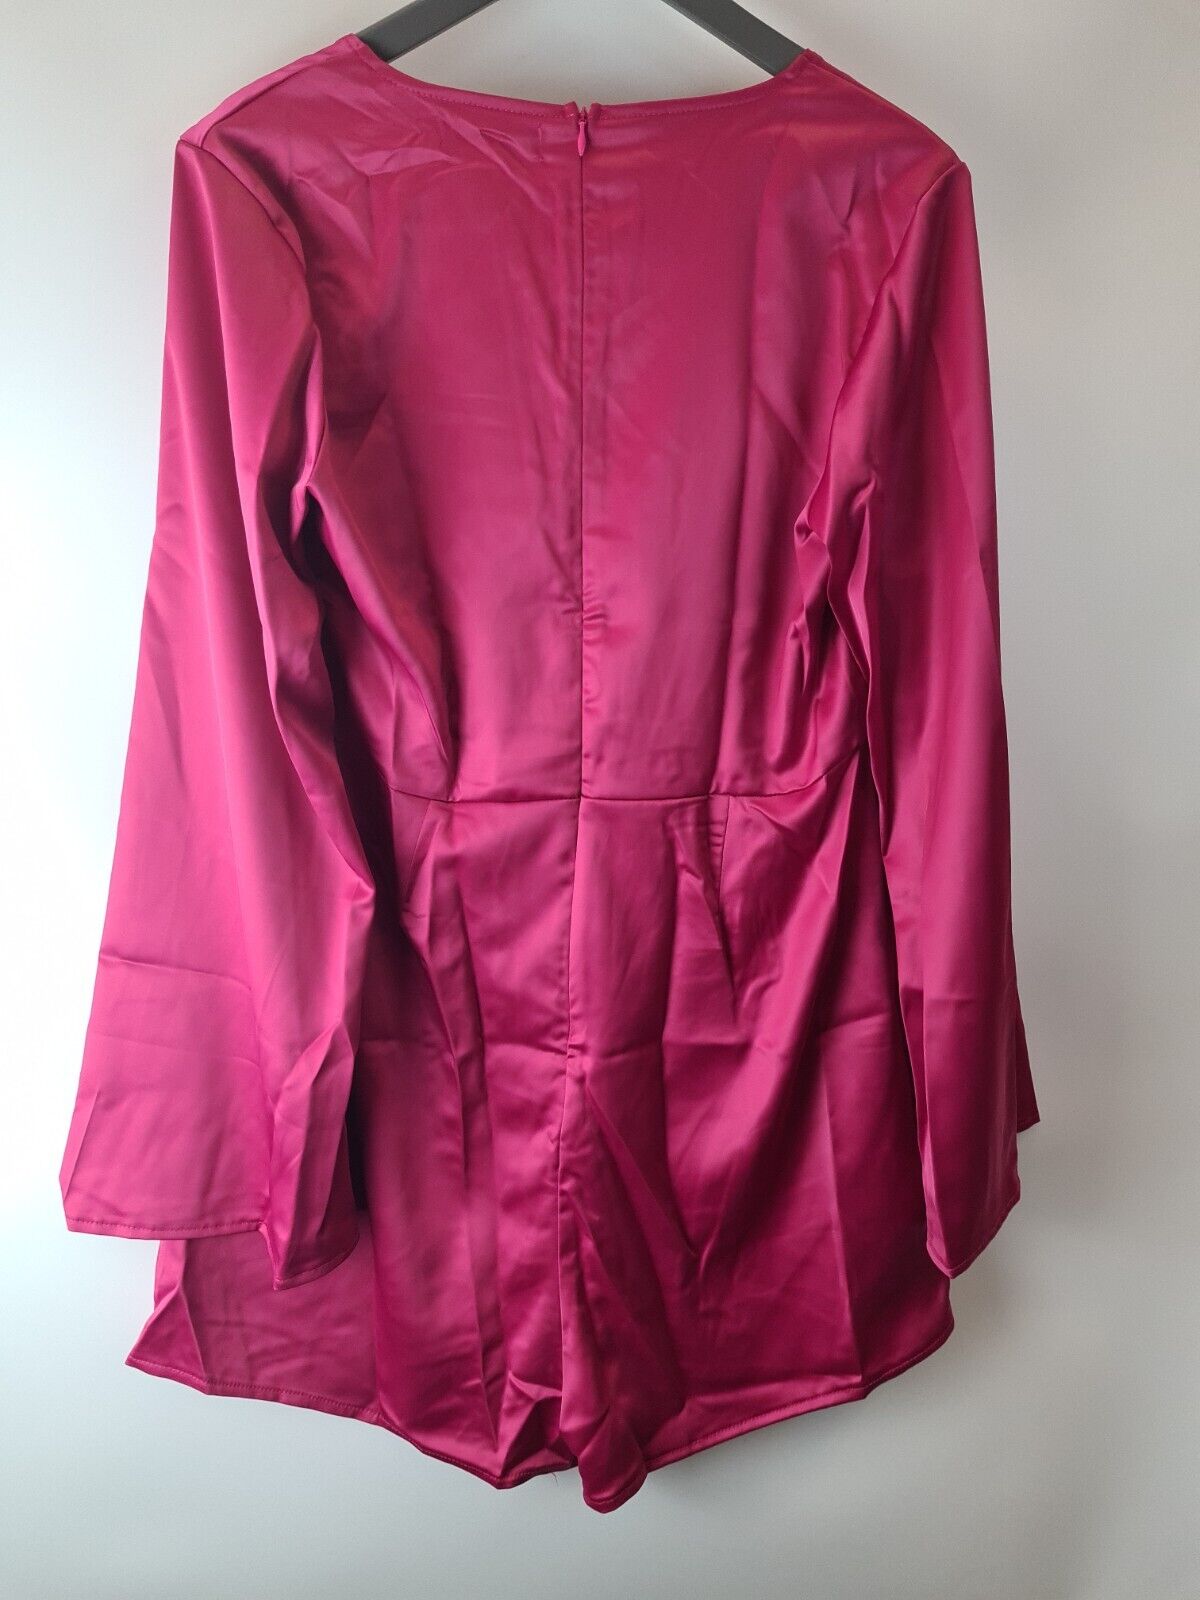 Missguided Satin Tie Front Flare Sleeves Hot Pink Playsuit. Size 10 **** V546